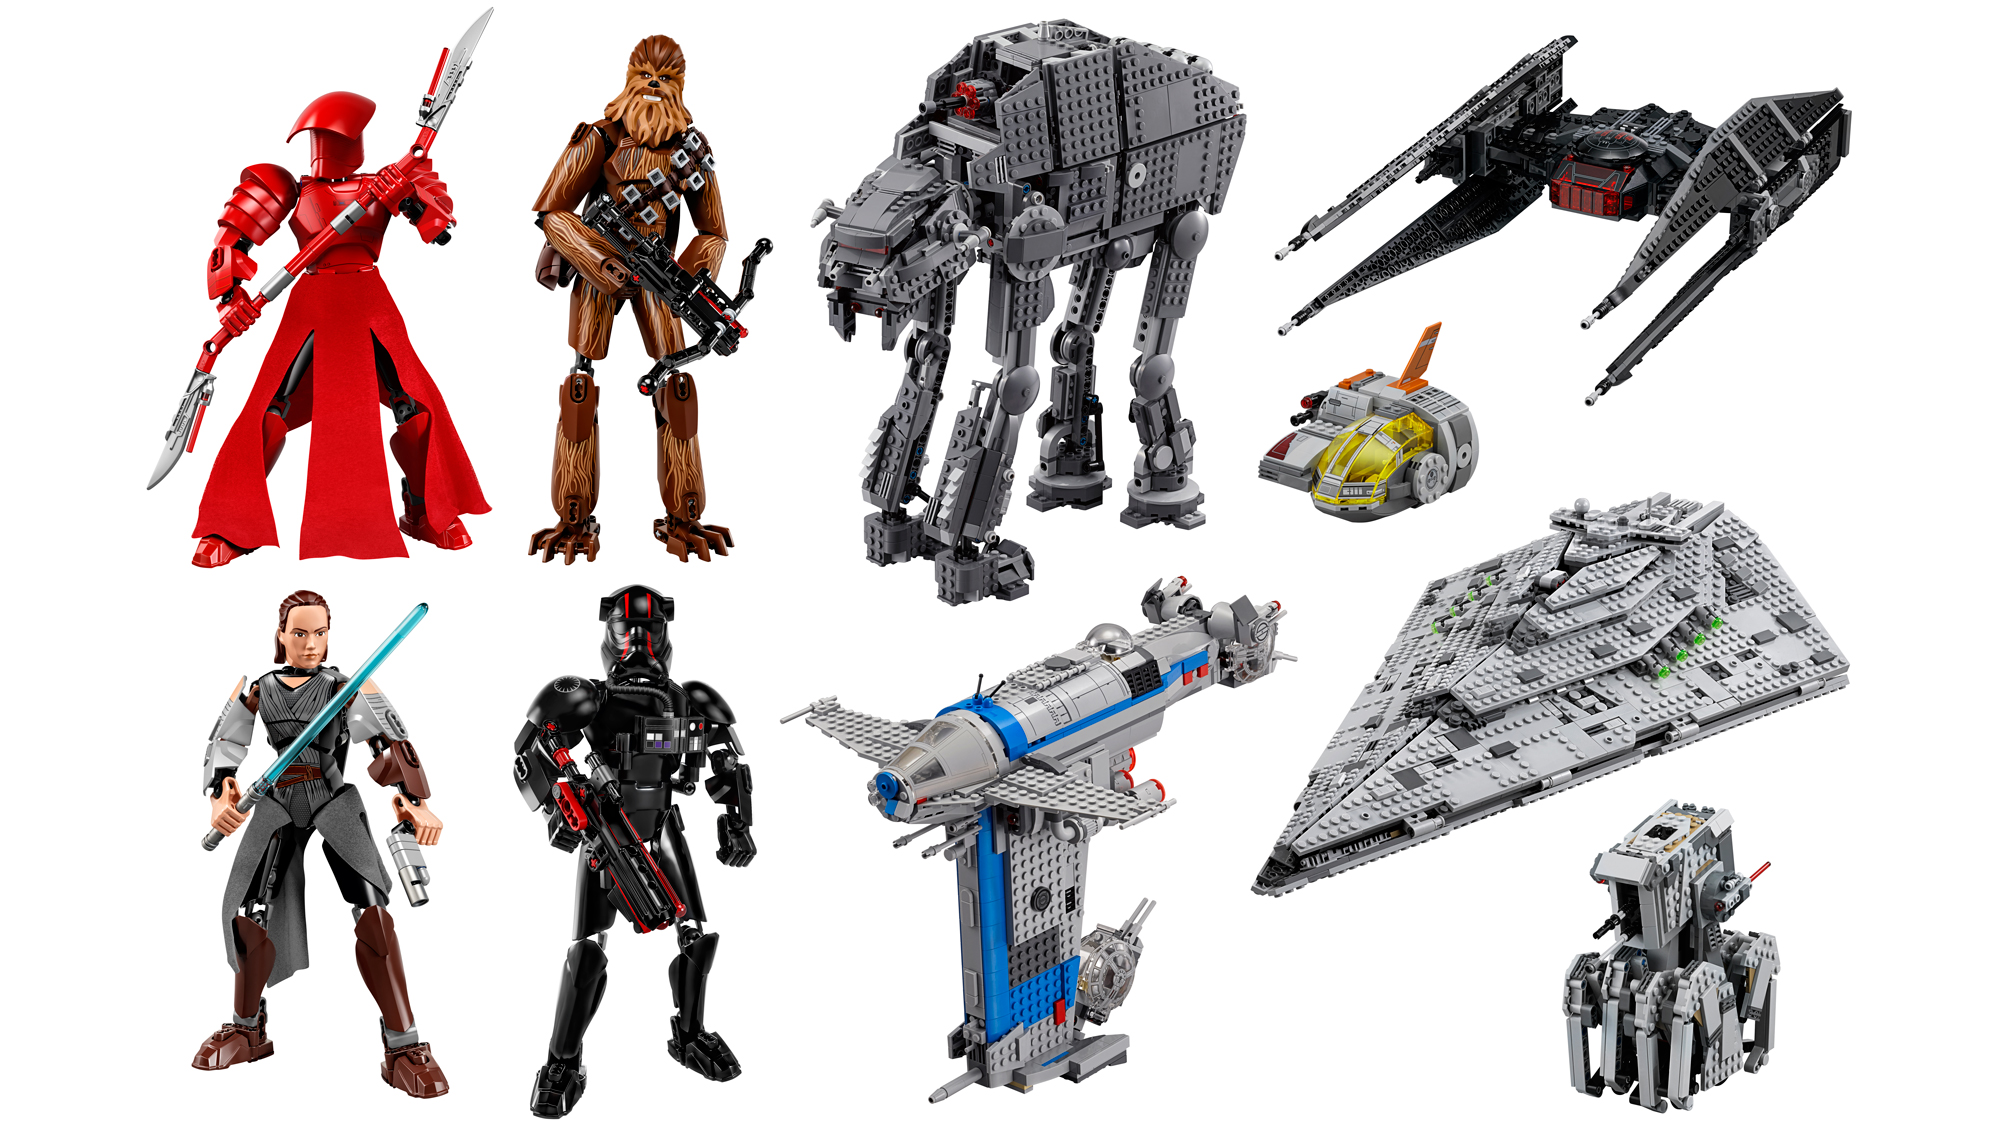 Star Wars' Force Friday: Up close with Lego's 'The Last Jedi